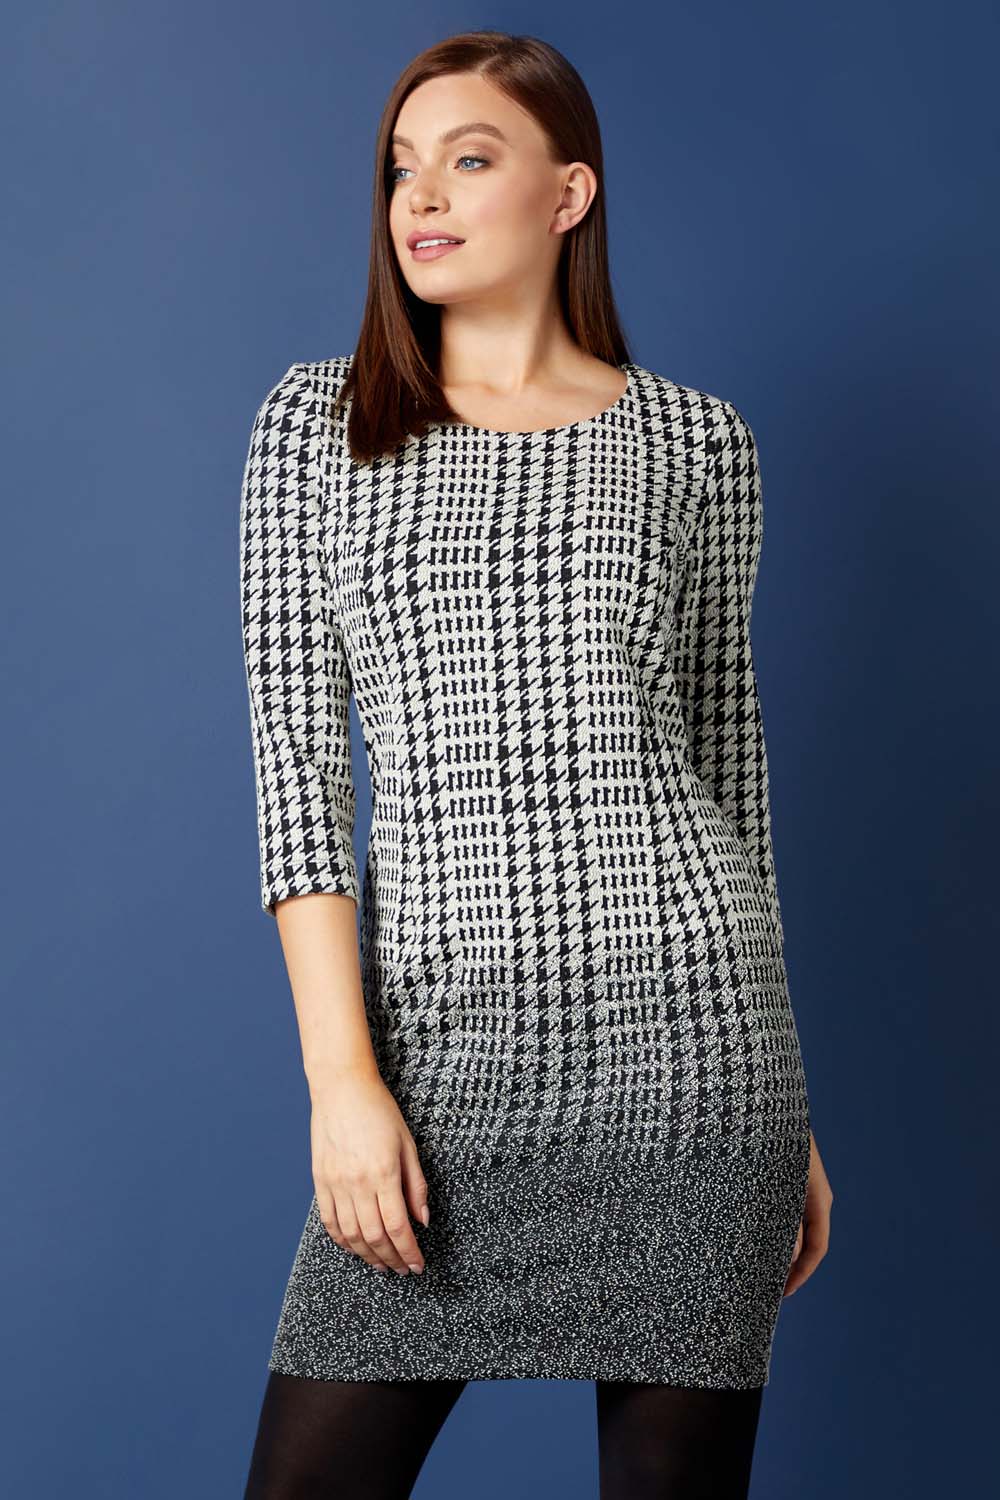 Dogtooth Check Ombre Textured Shift Dress in Black - Roman Originals UK